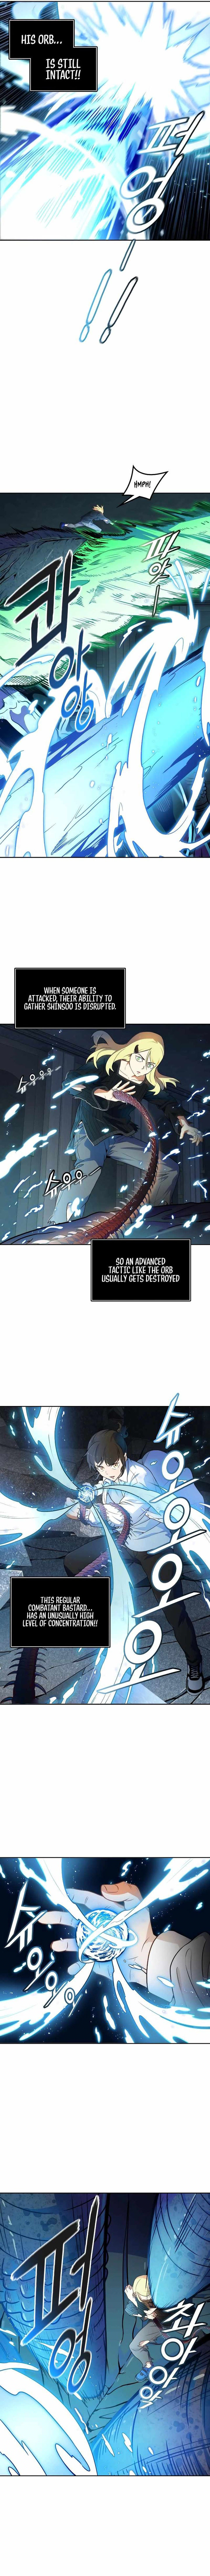 Tower Of God Chapter 561 Page 4